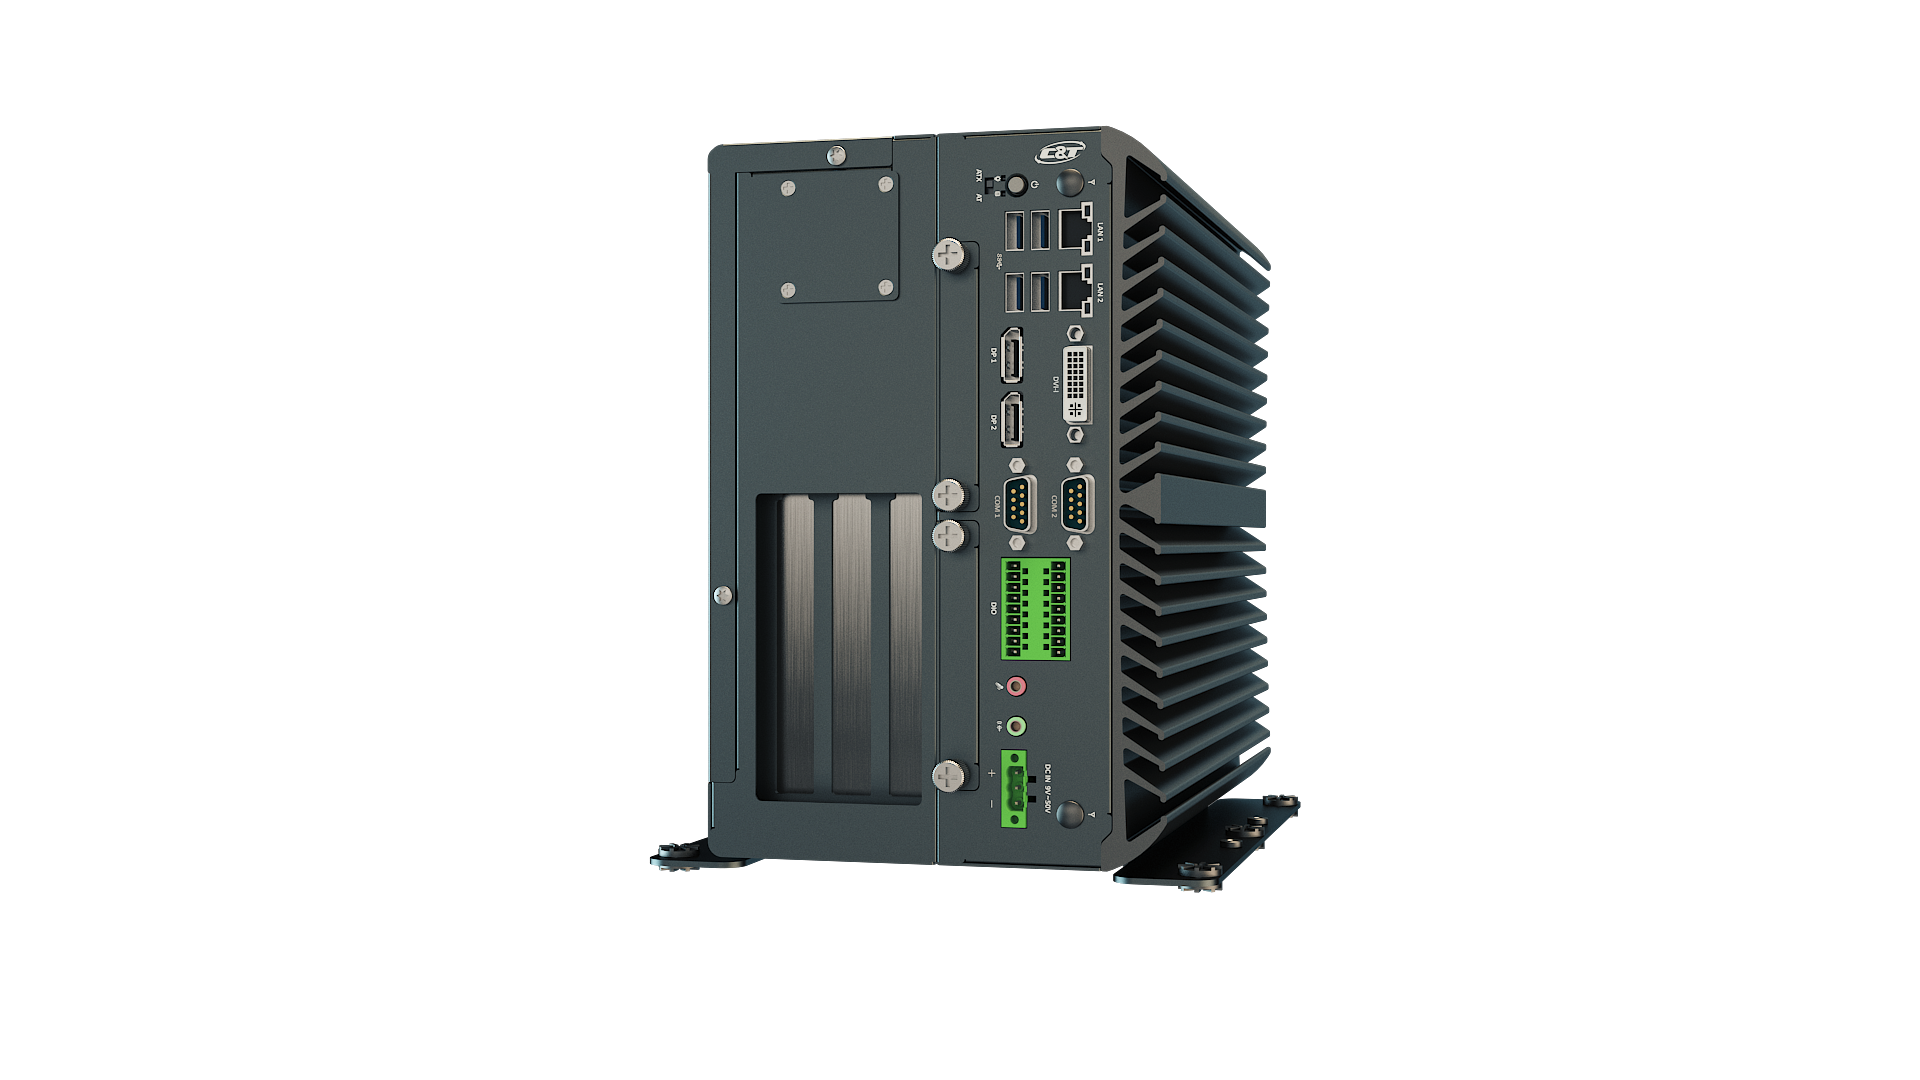 VCO-6000-KBL-3 Machine Vision Computer with 6th/7th Gen Intel® Core™ Processor, 3x Expansion Slots